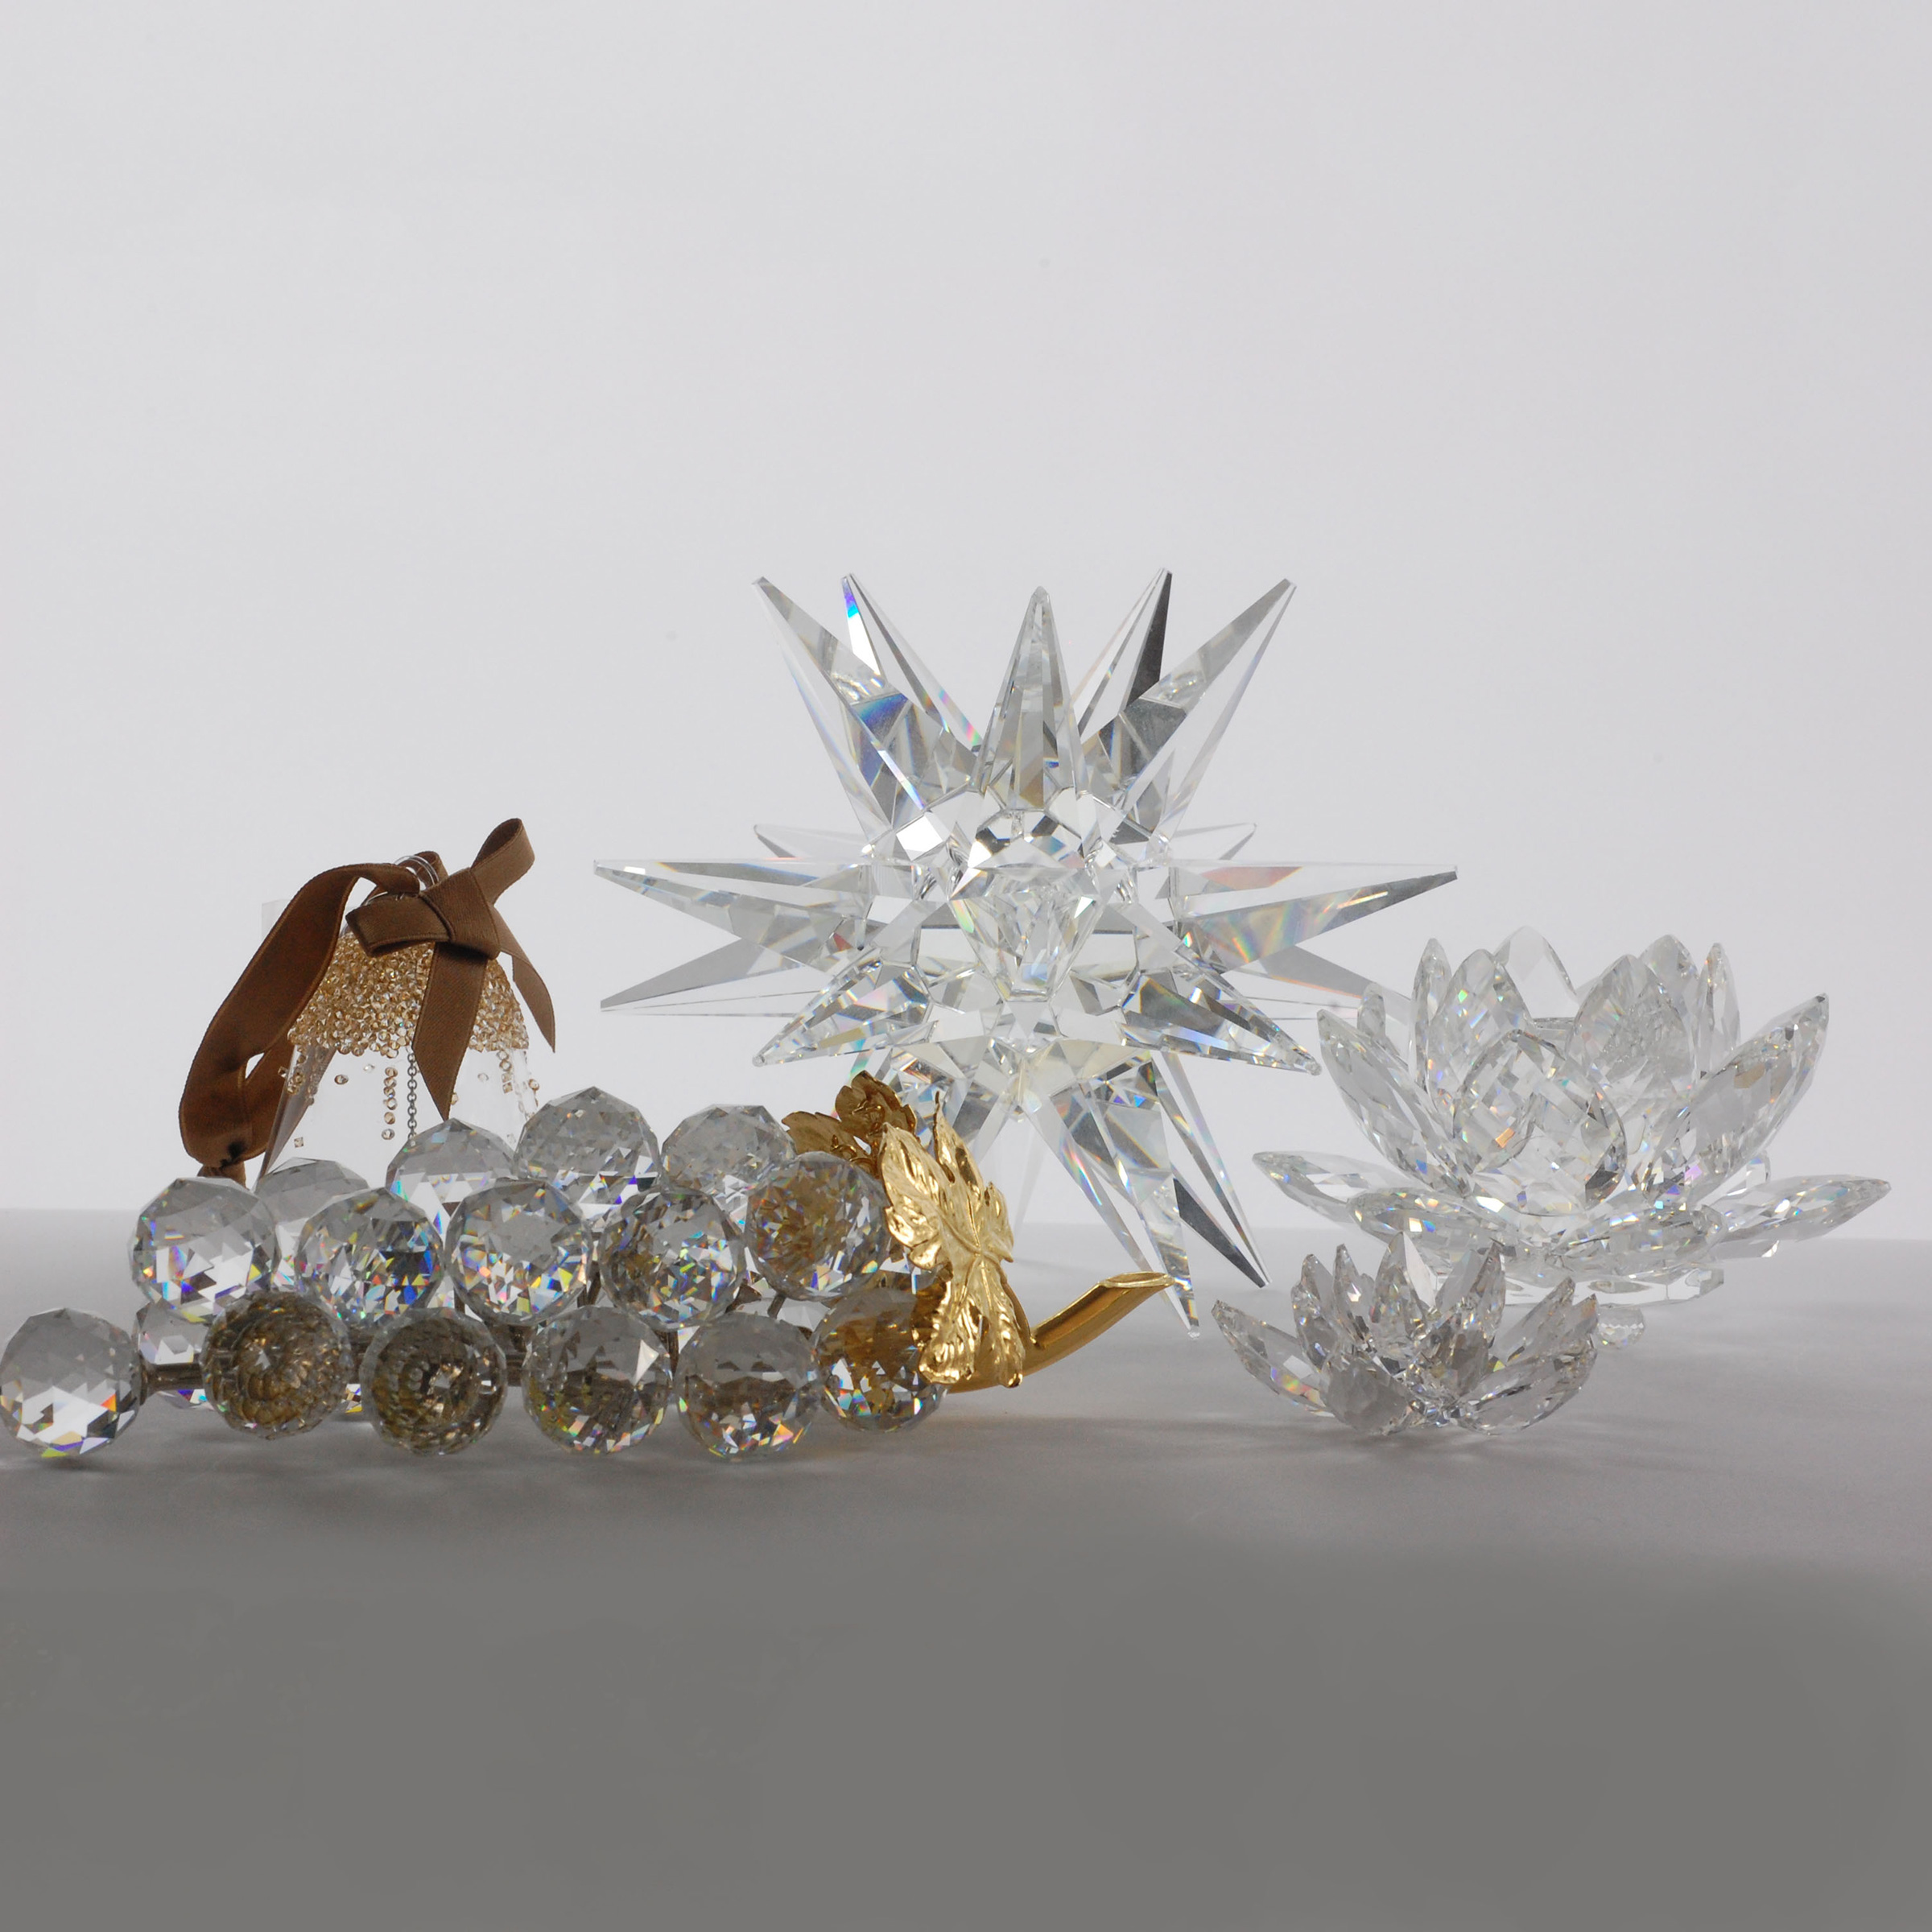 Three Swarovski Crystal Candleholders and Two Sculptures, late 20th/early 21st century